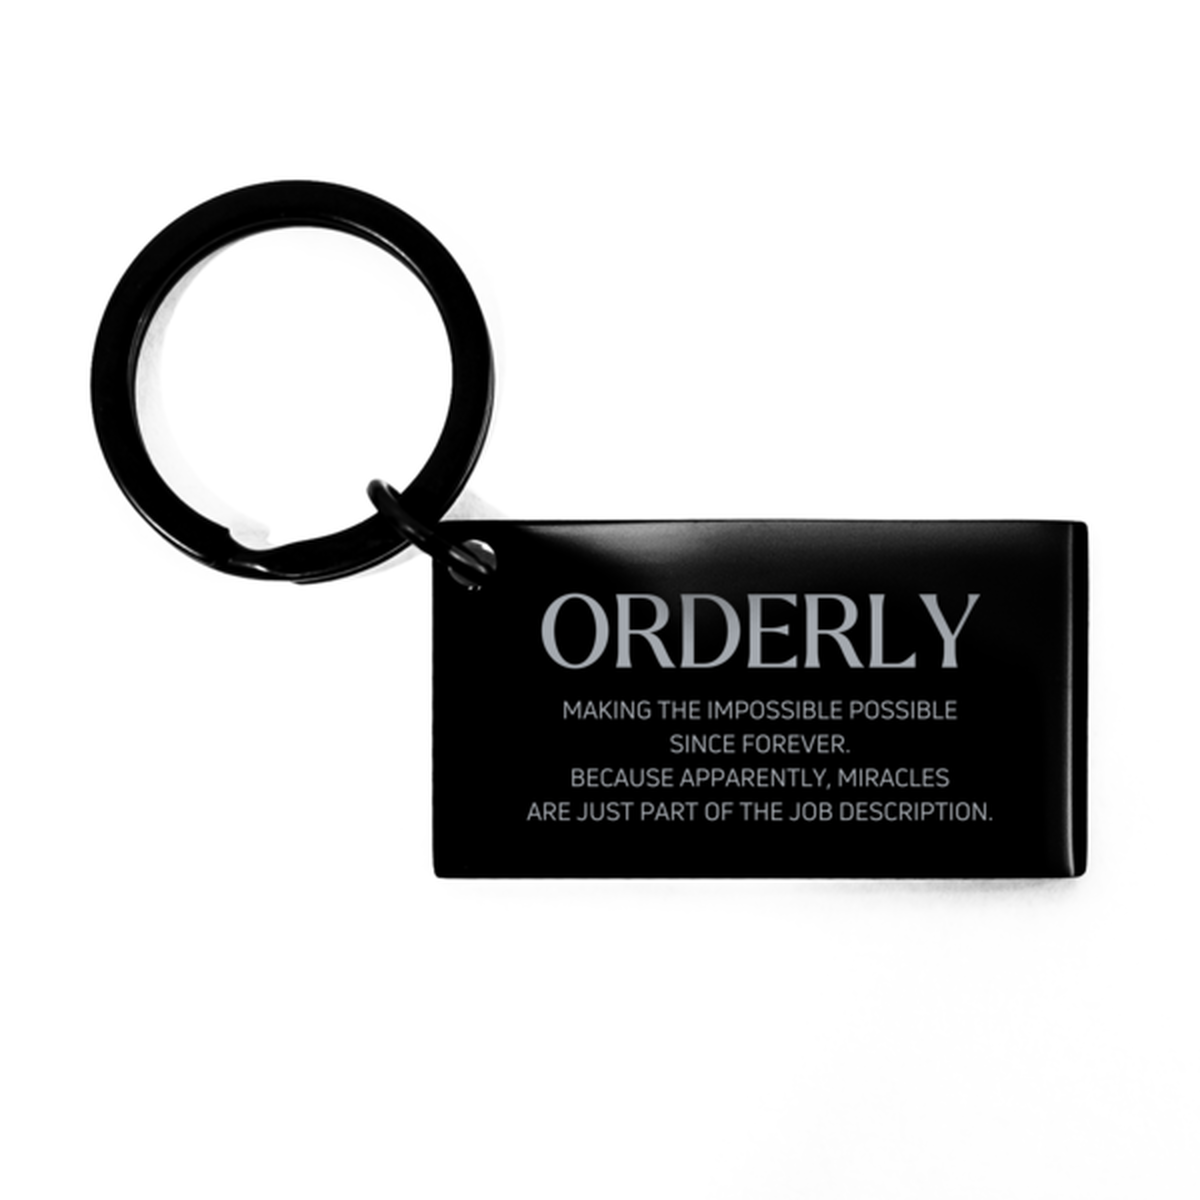 Funny Orderly Gifts, Miracles are just part of the job description, Inspirational Birthday Keychain For Orderly, Men, Women, Coworkers, Friends, Boss